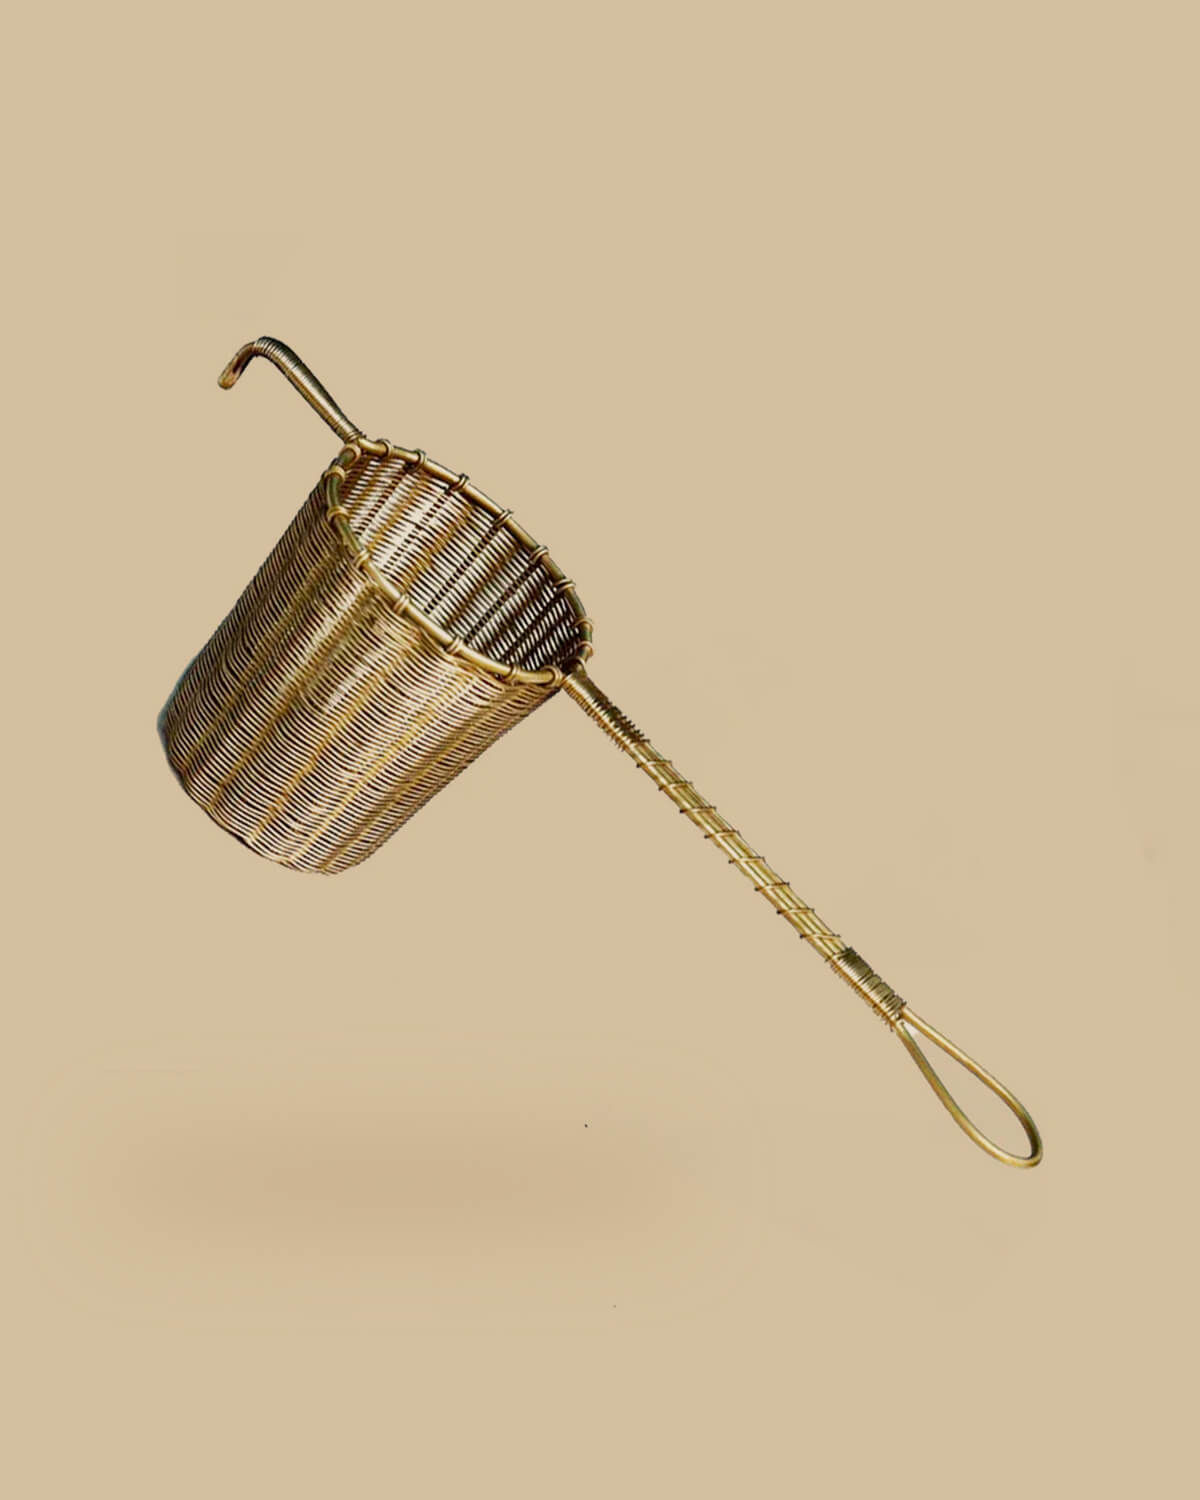 Antique Brass Woven Tea Stainer